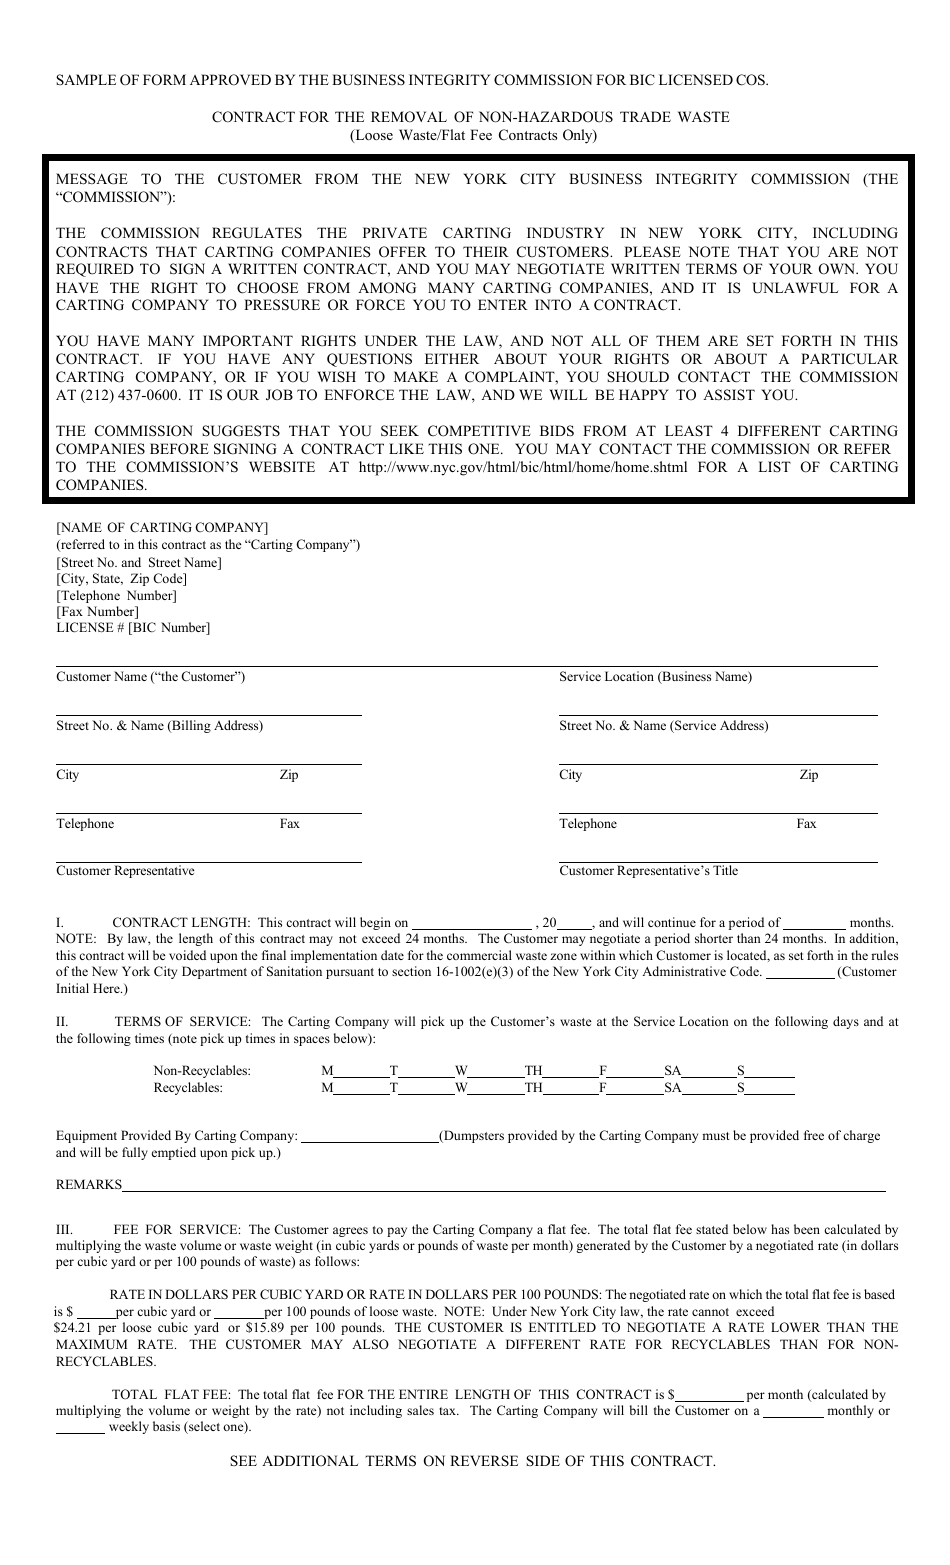 Contract for the Removal of Non-hazardous Trade Waste (Loose Waste / Flat Fee Contracts Only) - New York City, Page 1